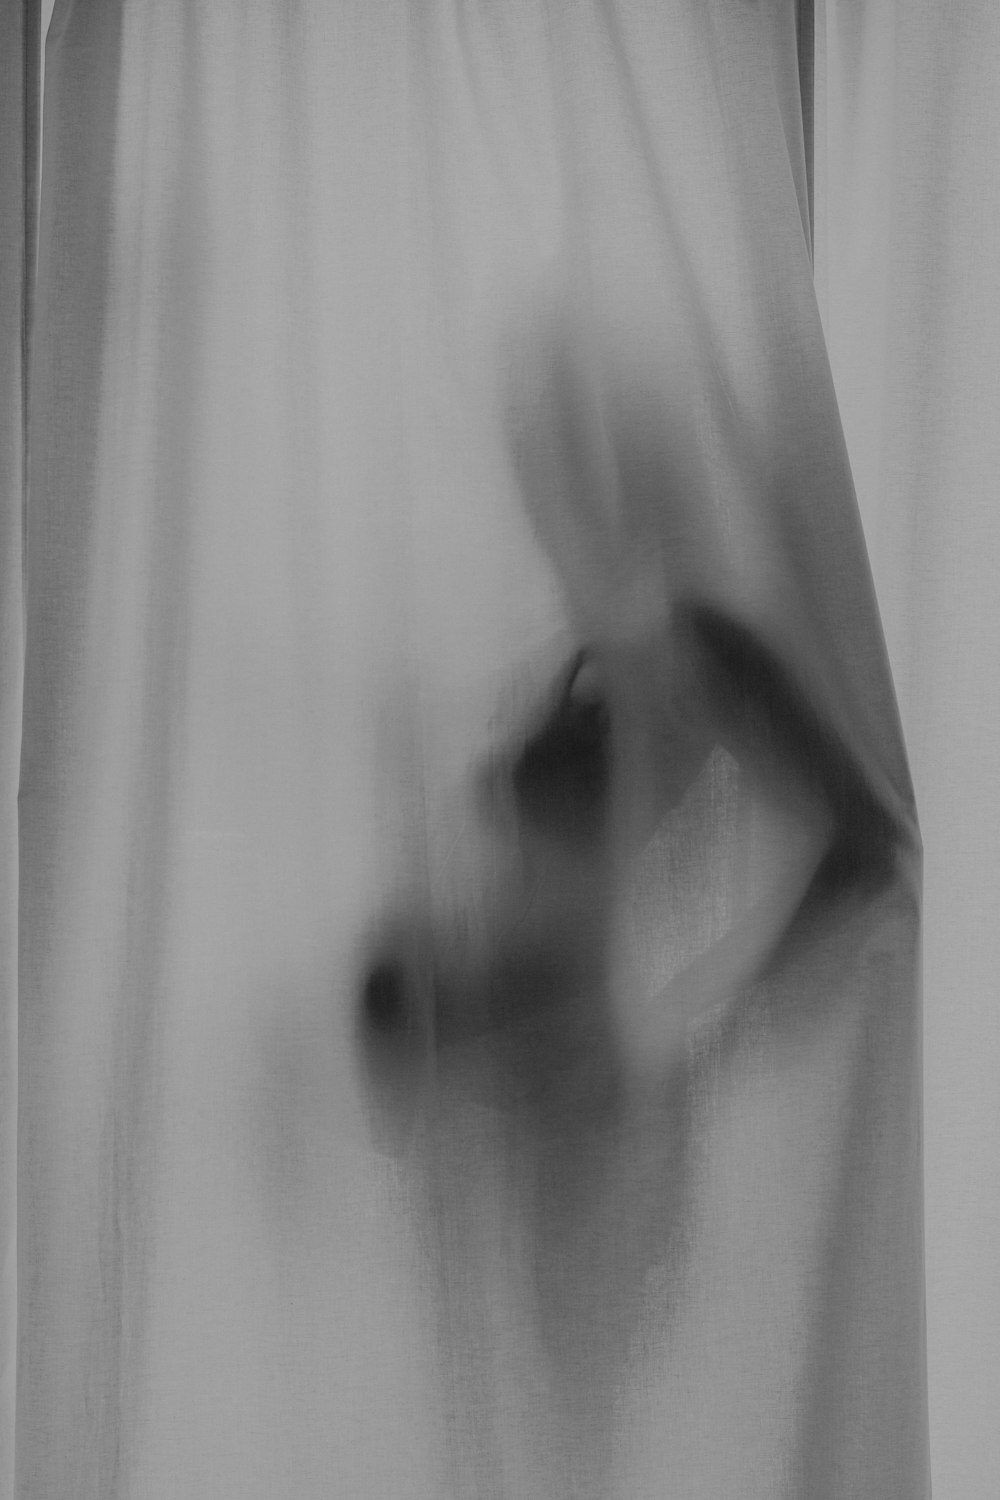 a blurry image of a person's hand coming out of a curtain